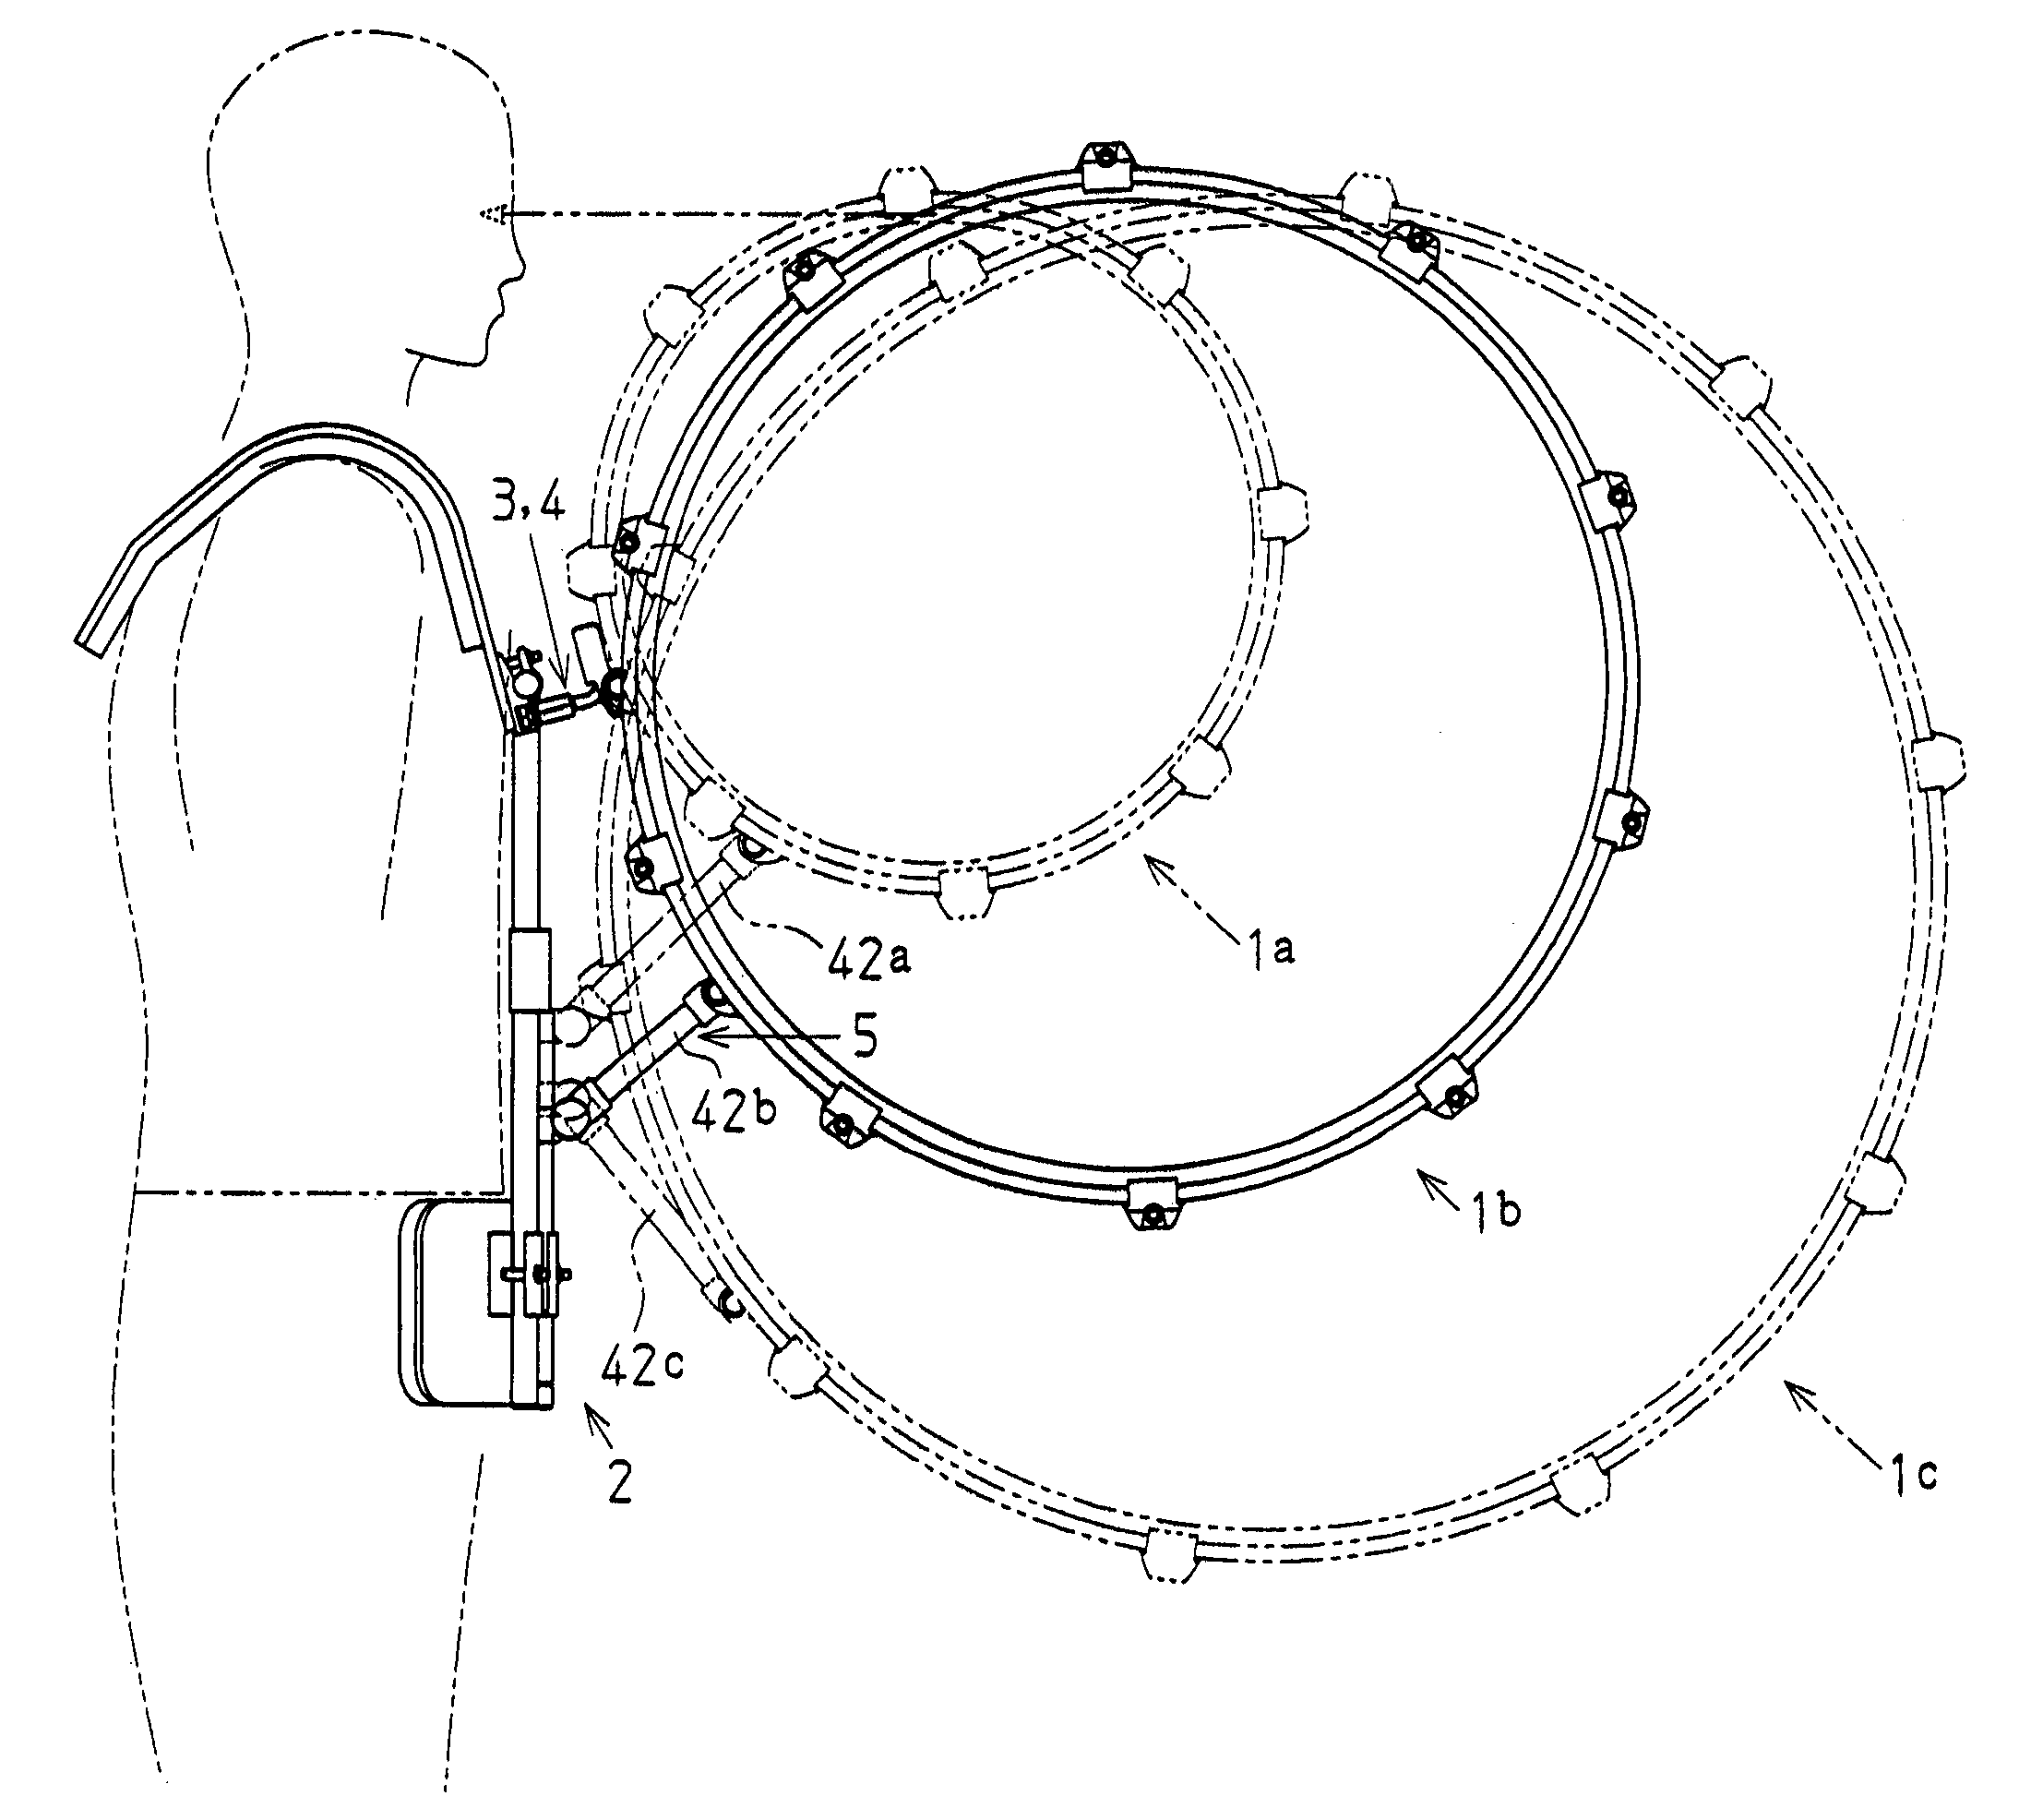 Marching bass drum supporting structure, marching bass drum, and carrier